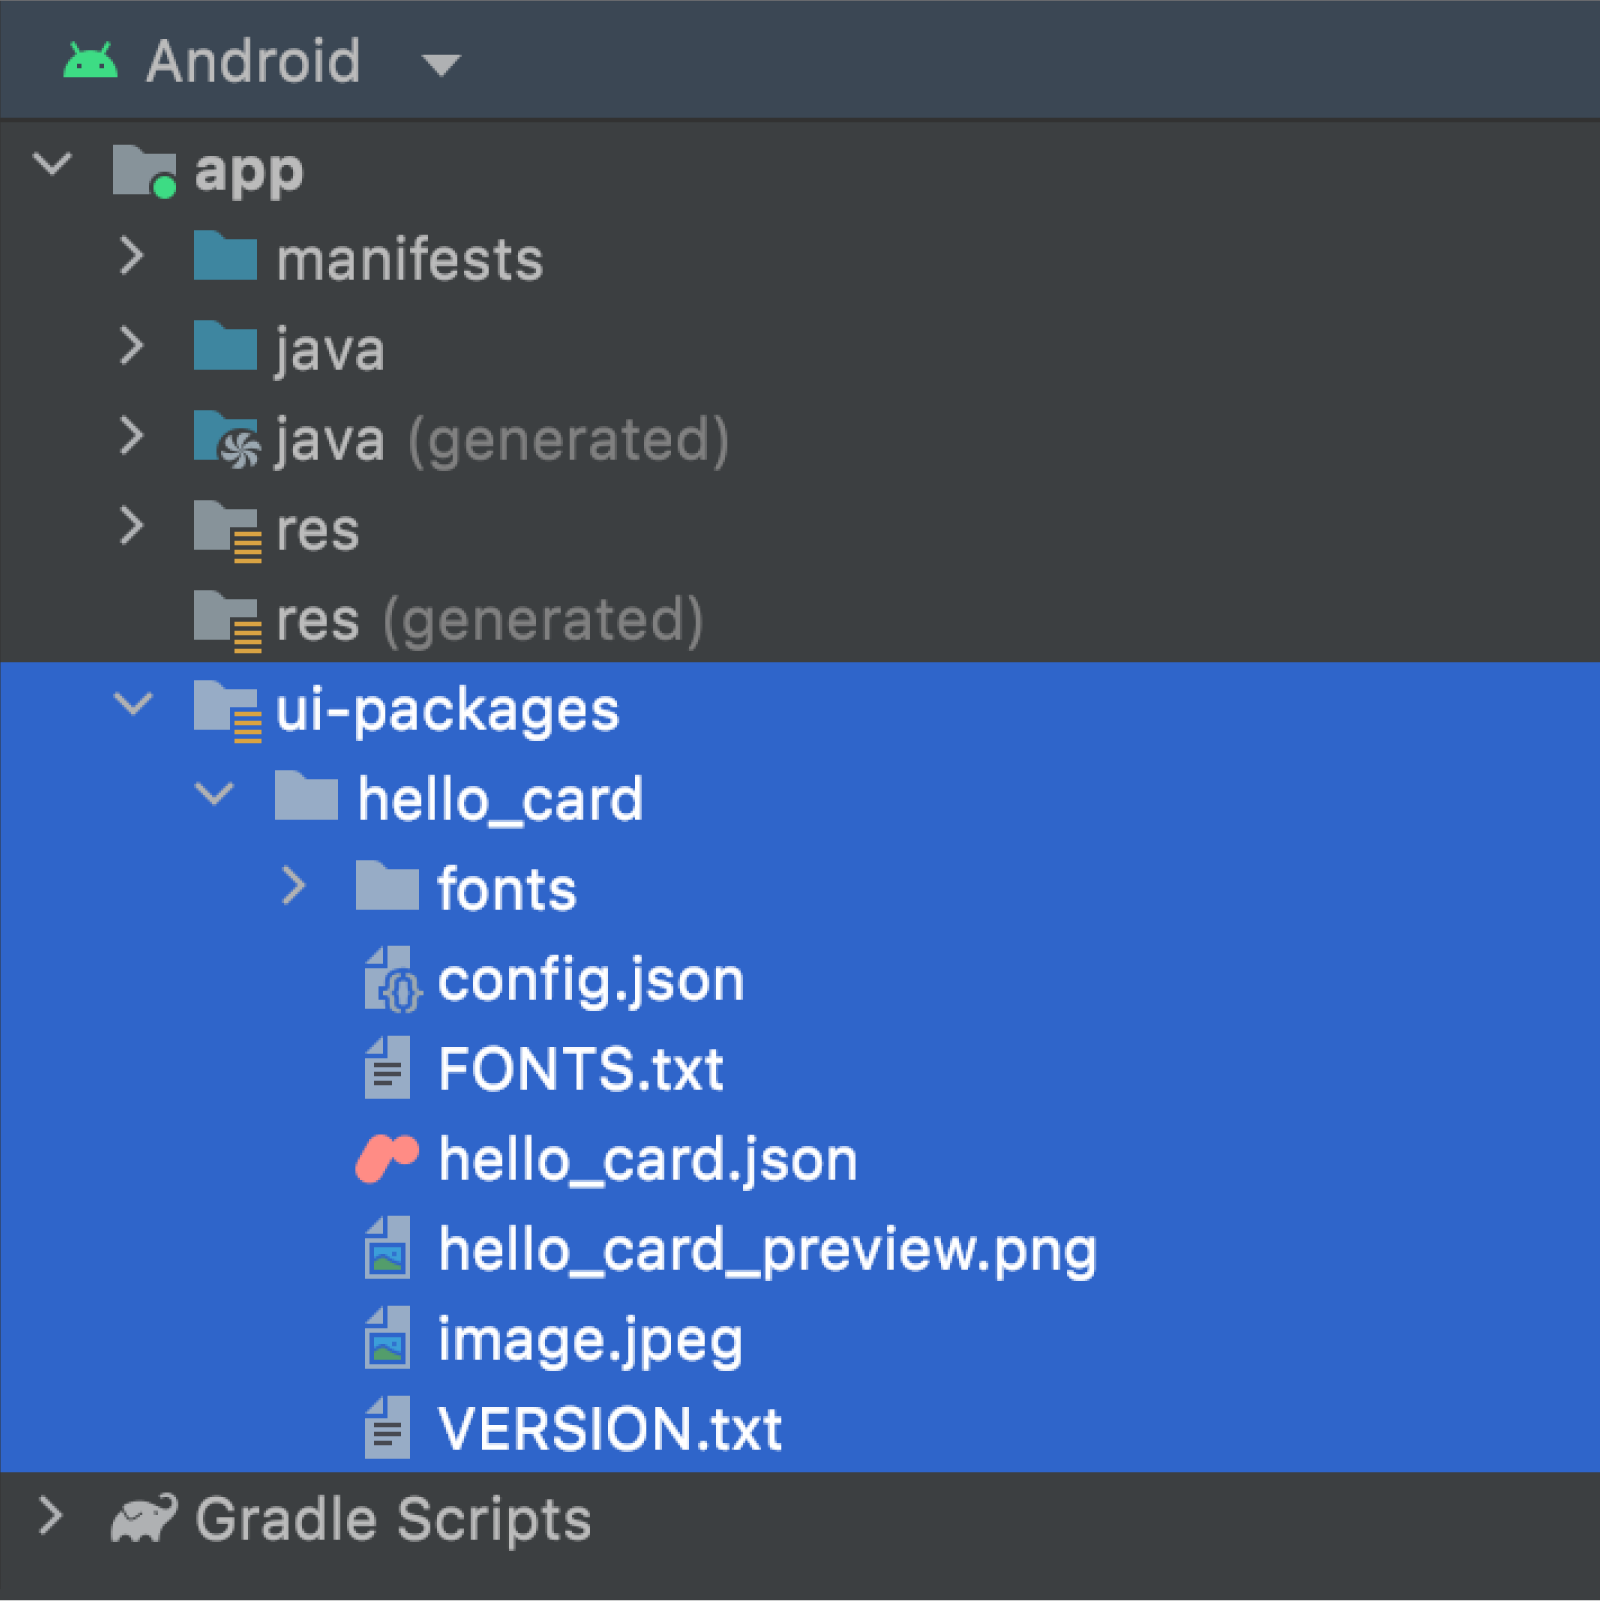 UI-packages folder in the Android view